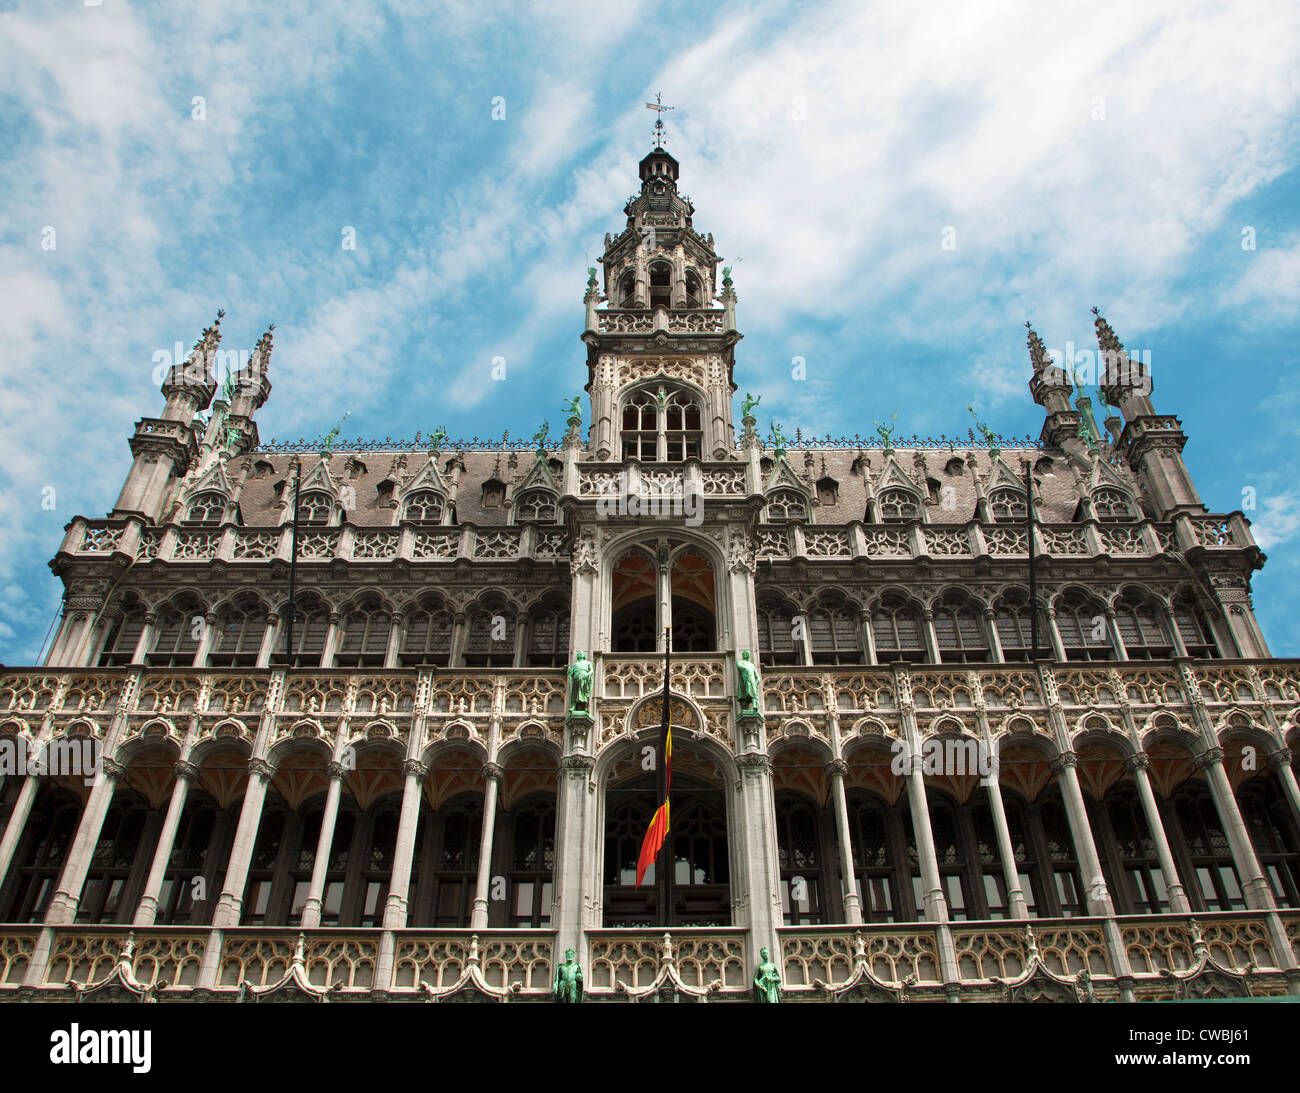 Brussels - The facade of Grand palace from main square. Grote Markt. Stock Photo